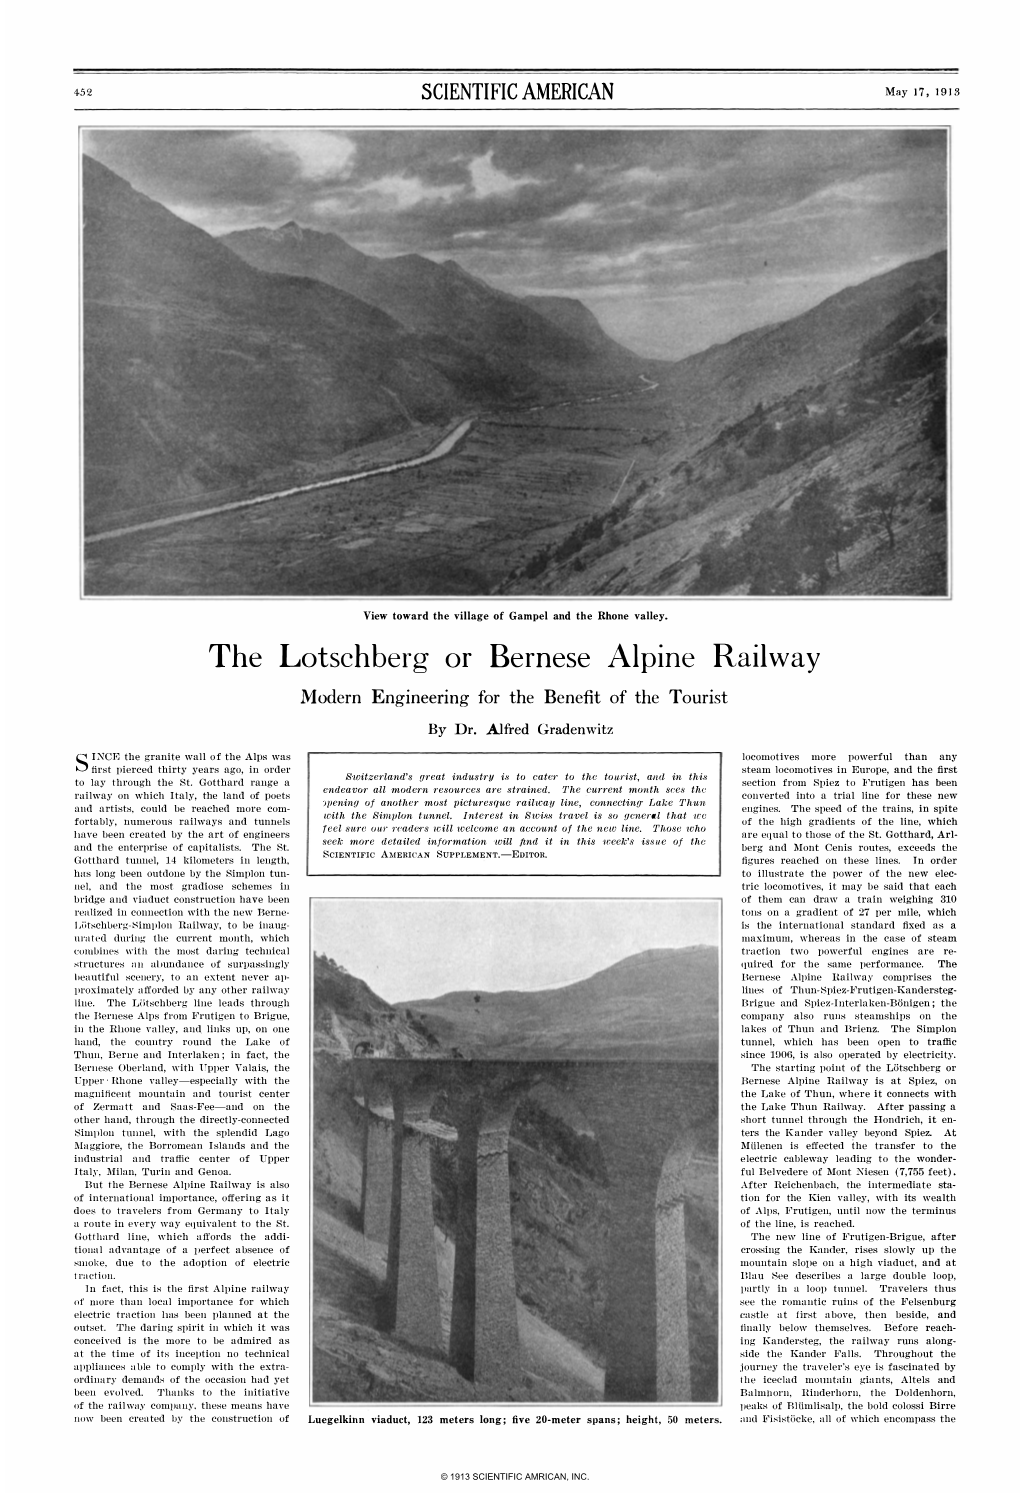 The Lotschberg Or Bernese Alpine Railway Modern Engineering for the Benefit of the Tourist